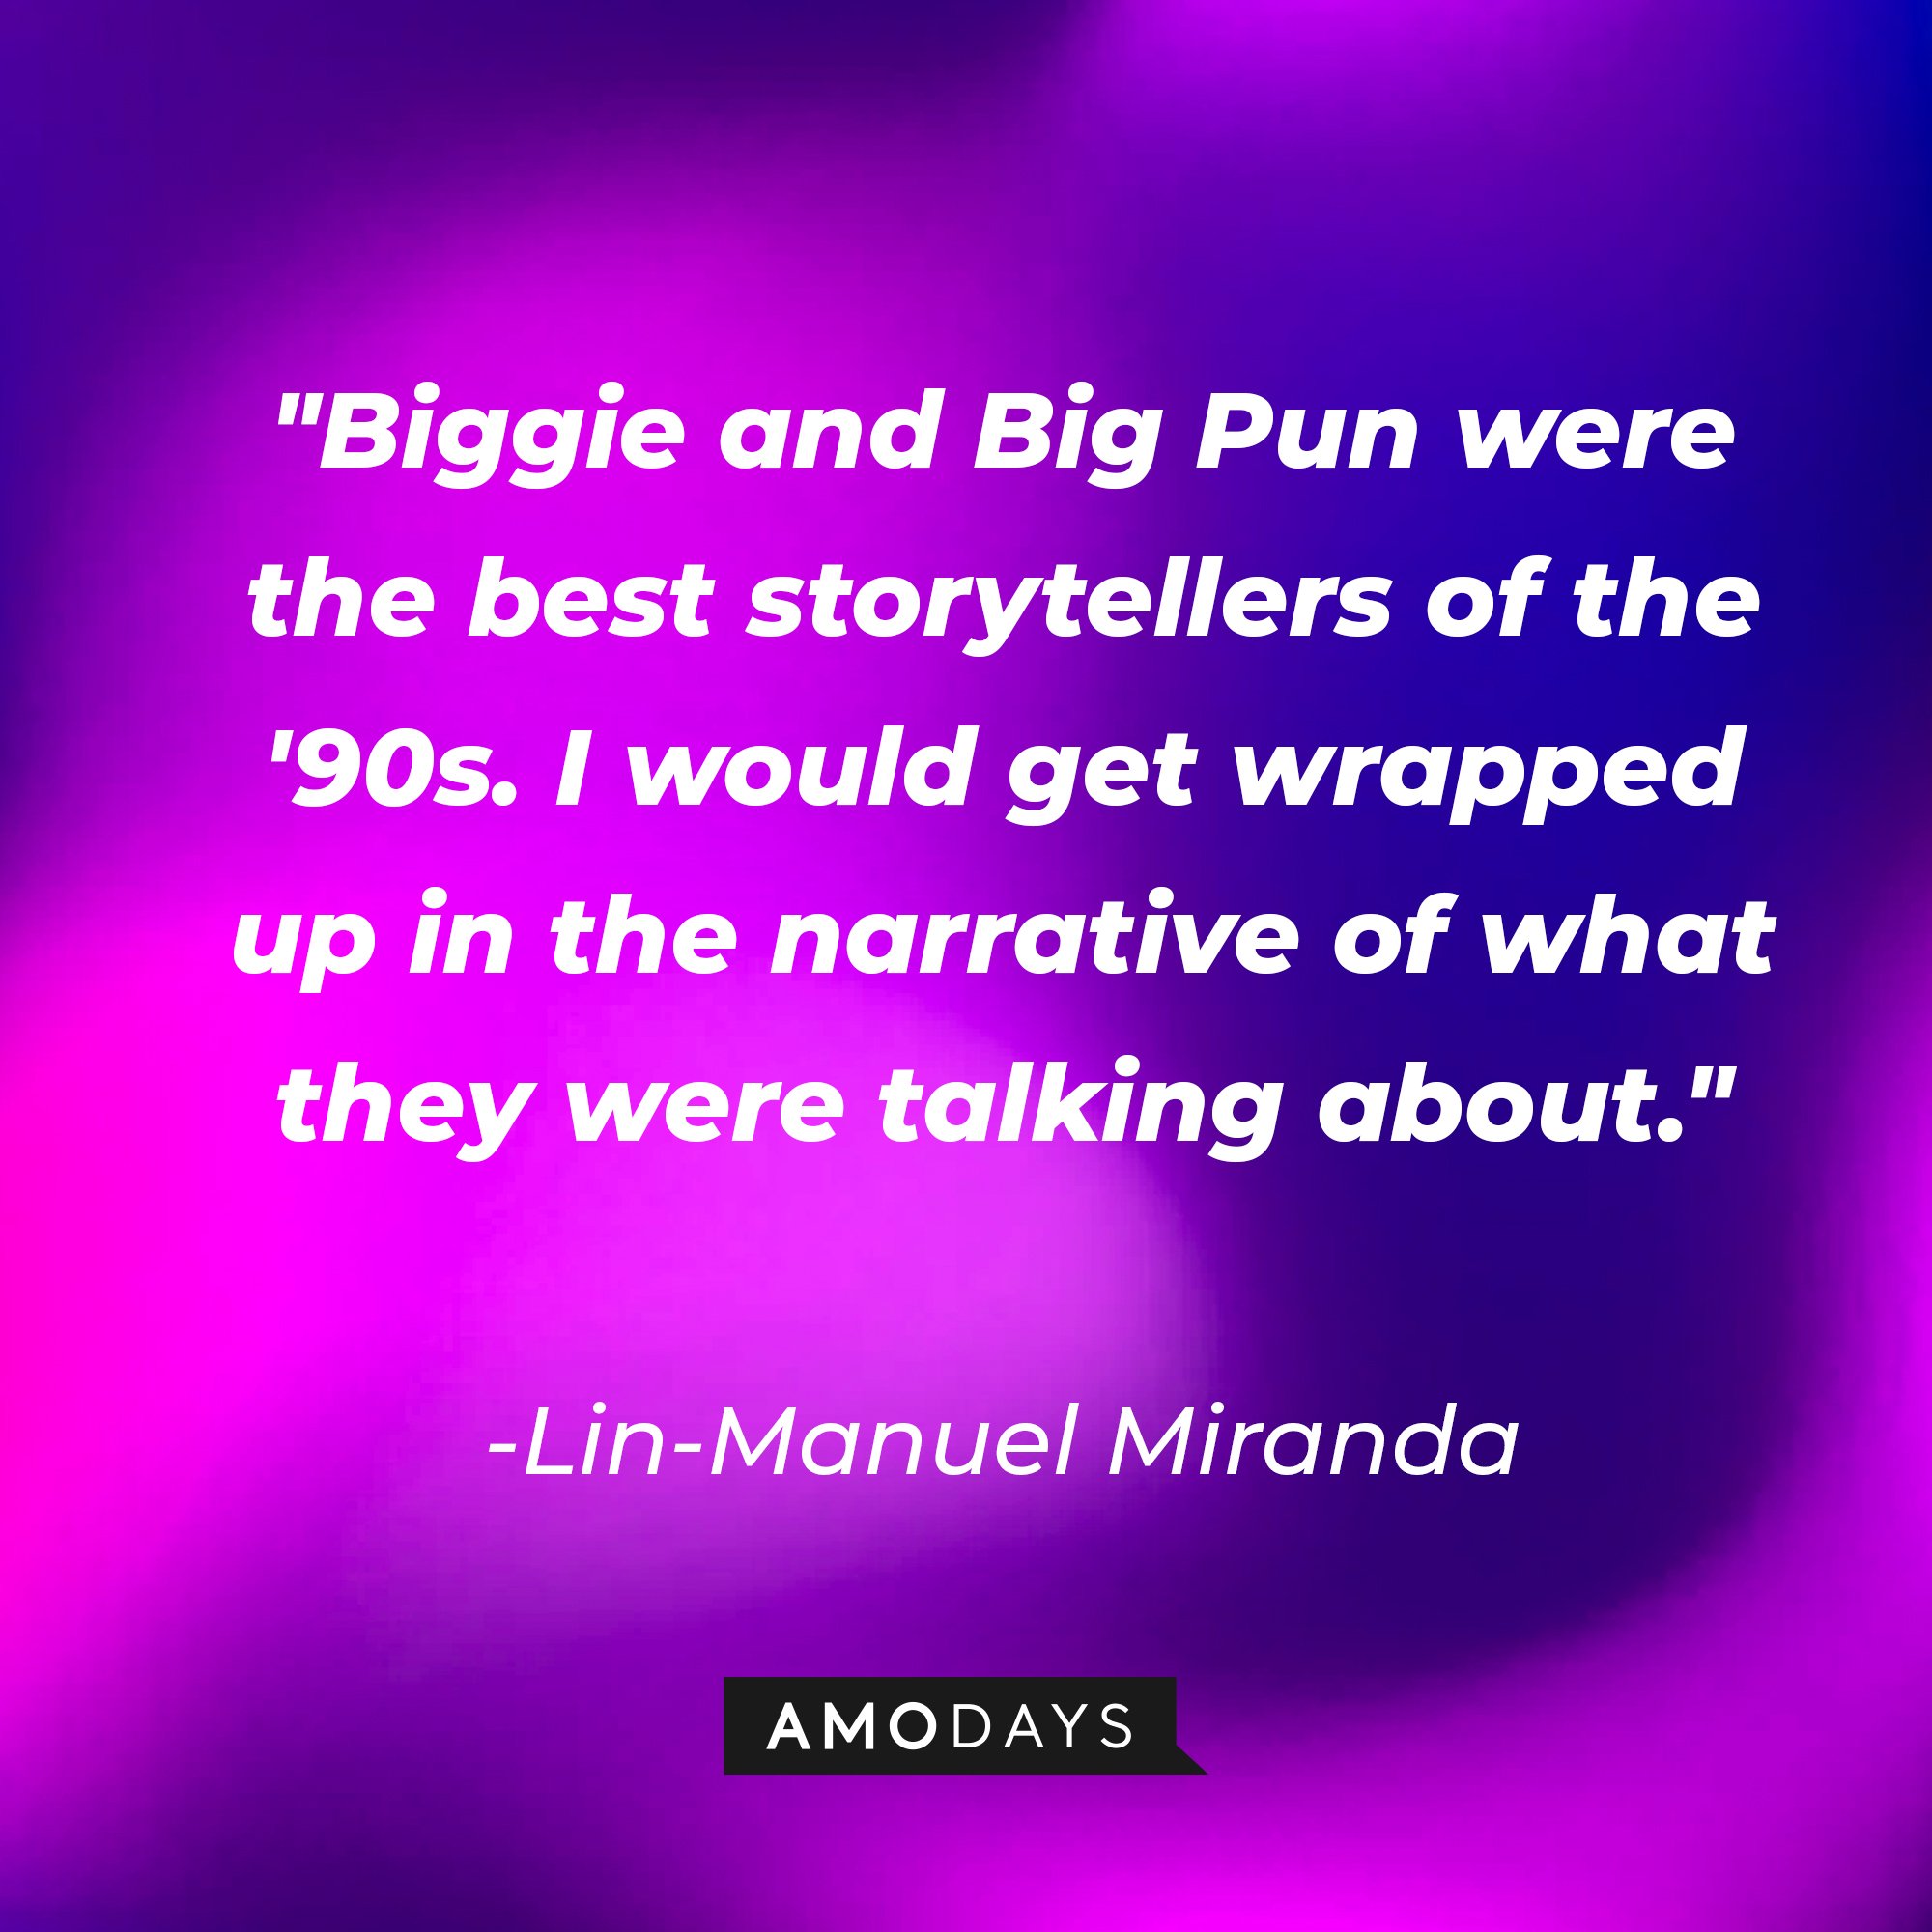 Lin-Manuel Miranda's quote: "Biggie and Big Pun were the best storytellers of the '90s. I would get wrapped up in the narrative of what they were talking about." | Image: AmoDays